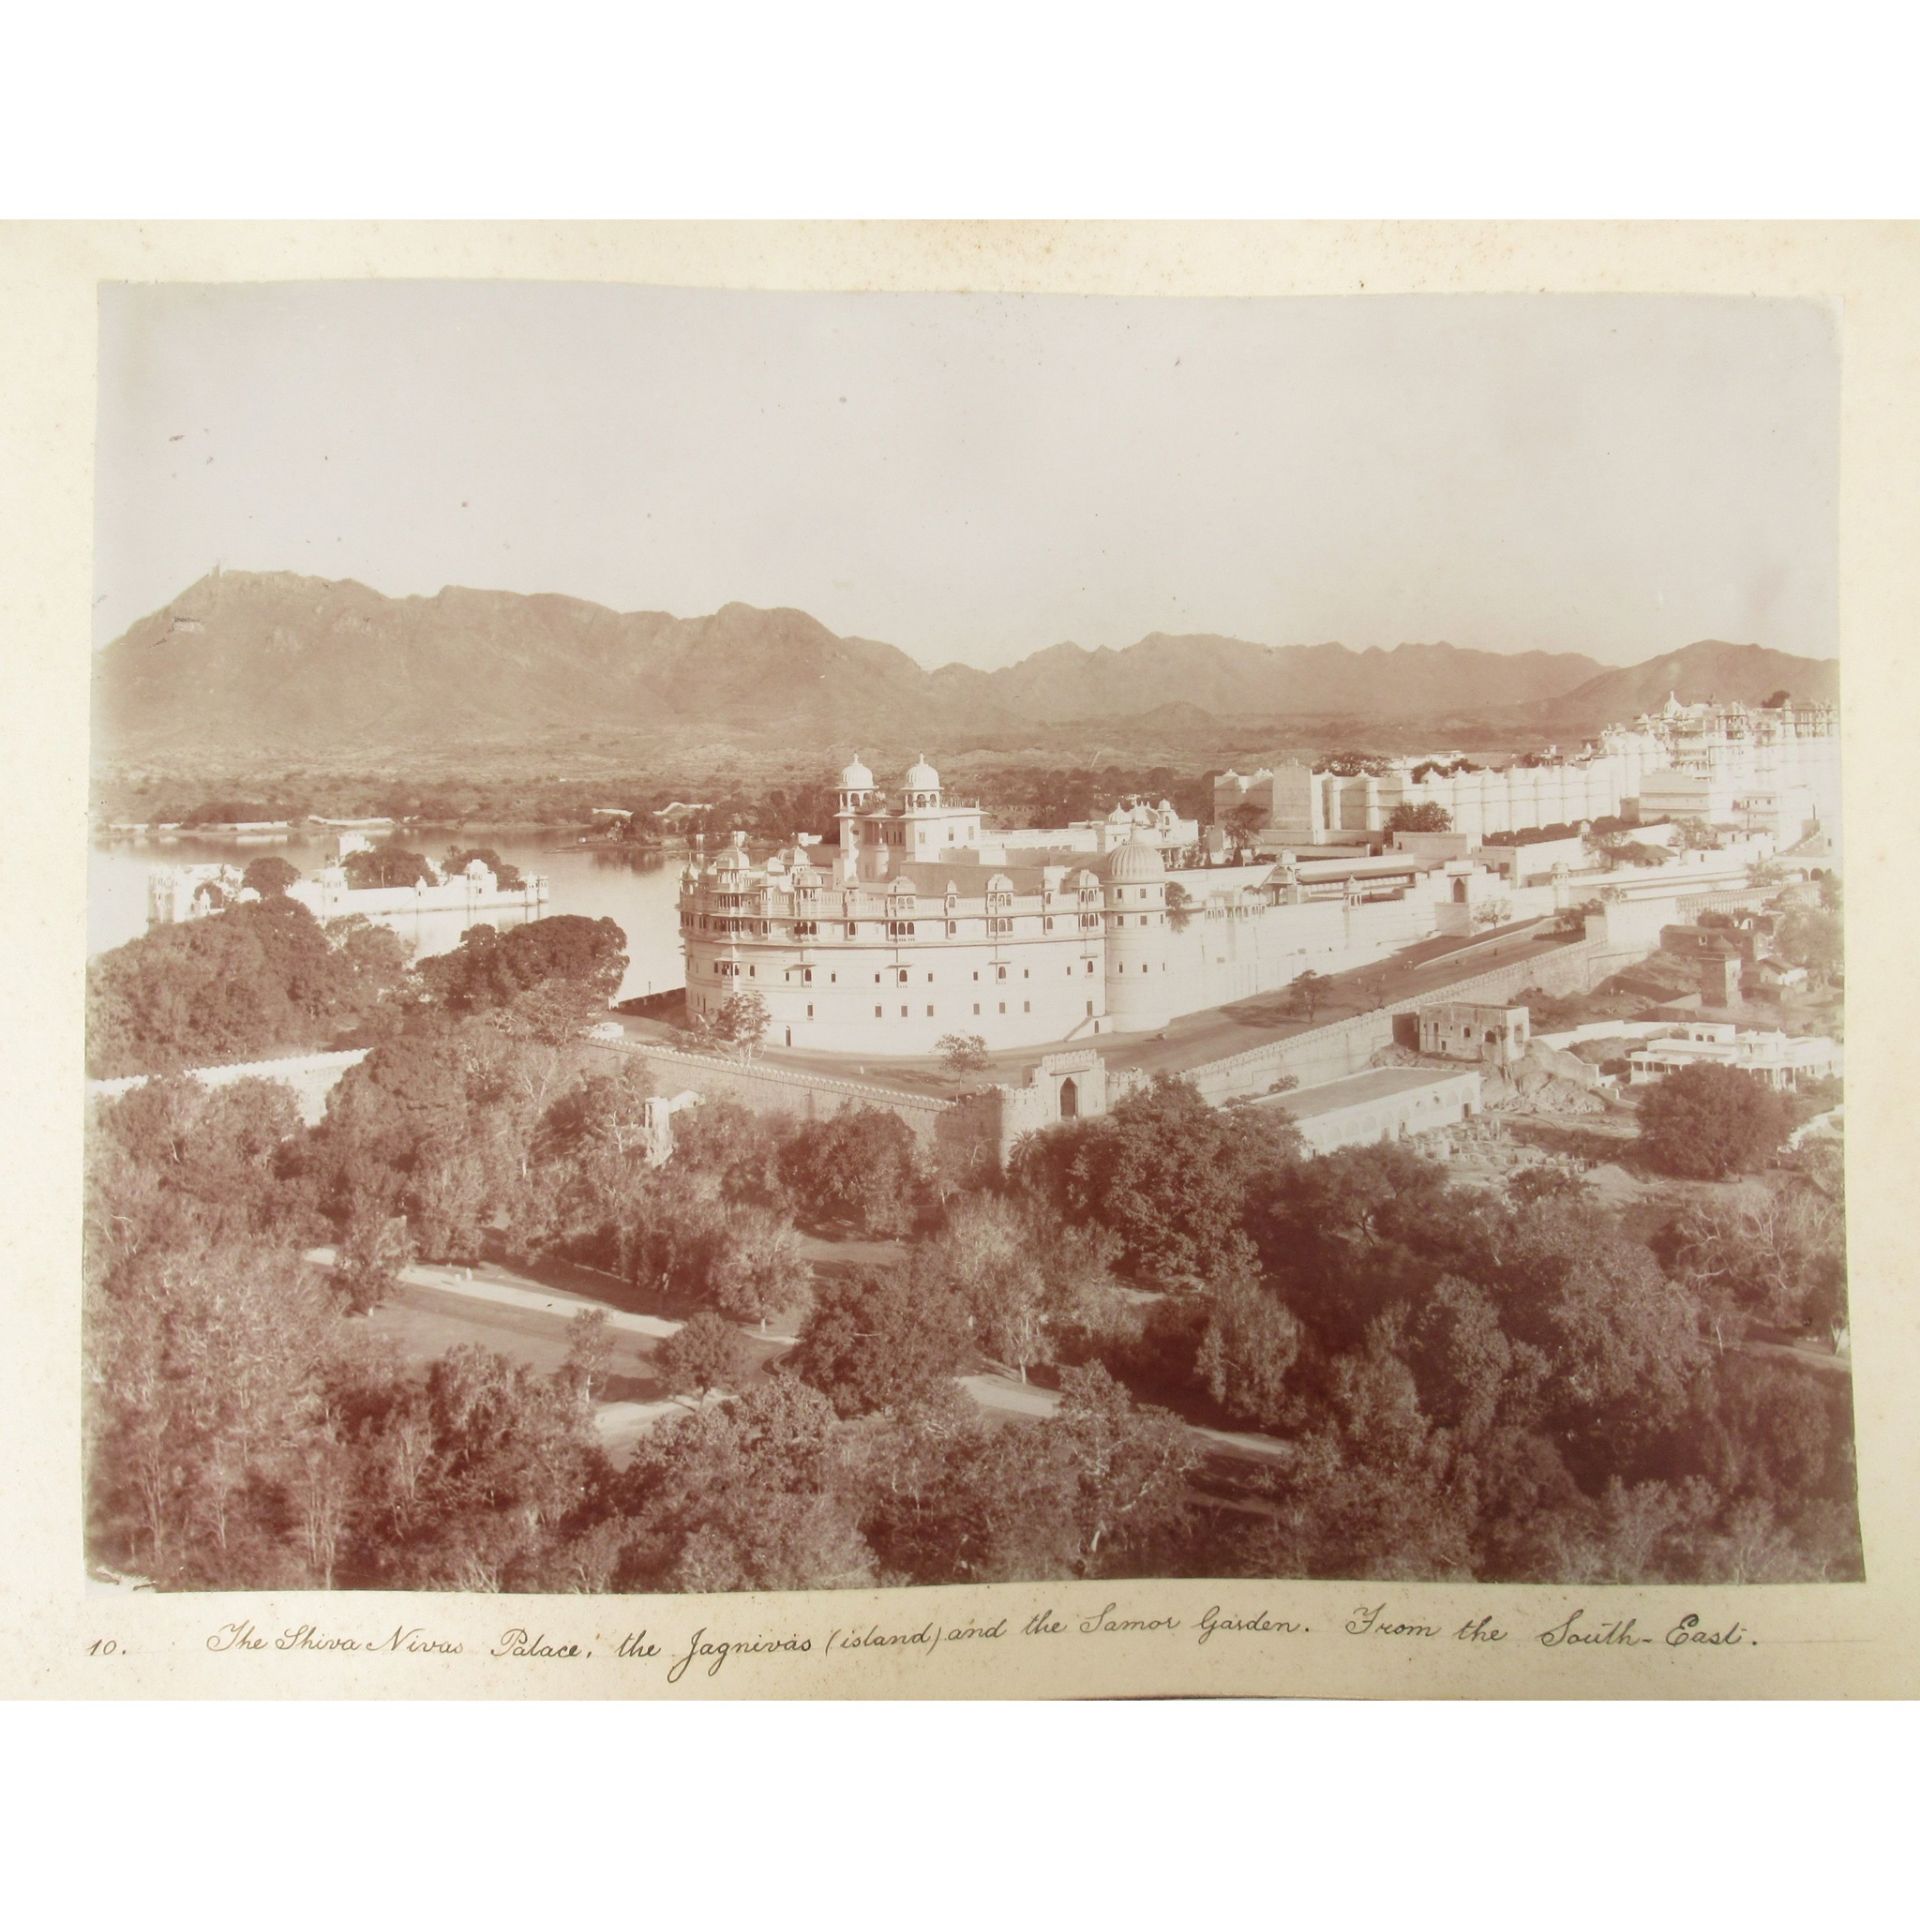 India: a photograph album Photographs of Rajasthan by Mohan Lal of Udaipur, late 19th century - Image 5 of 23